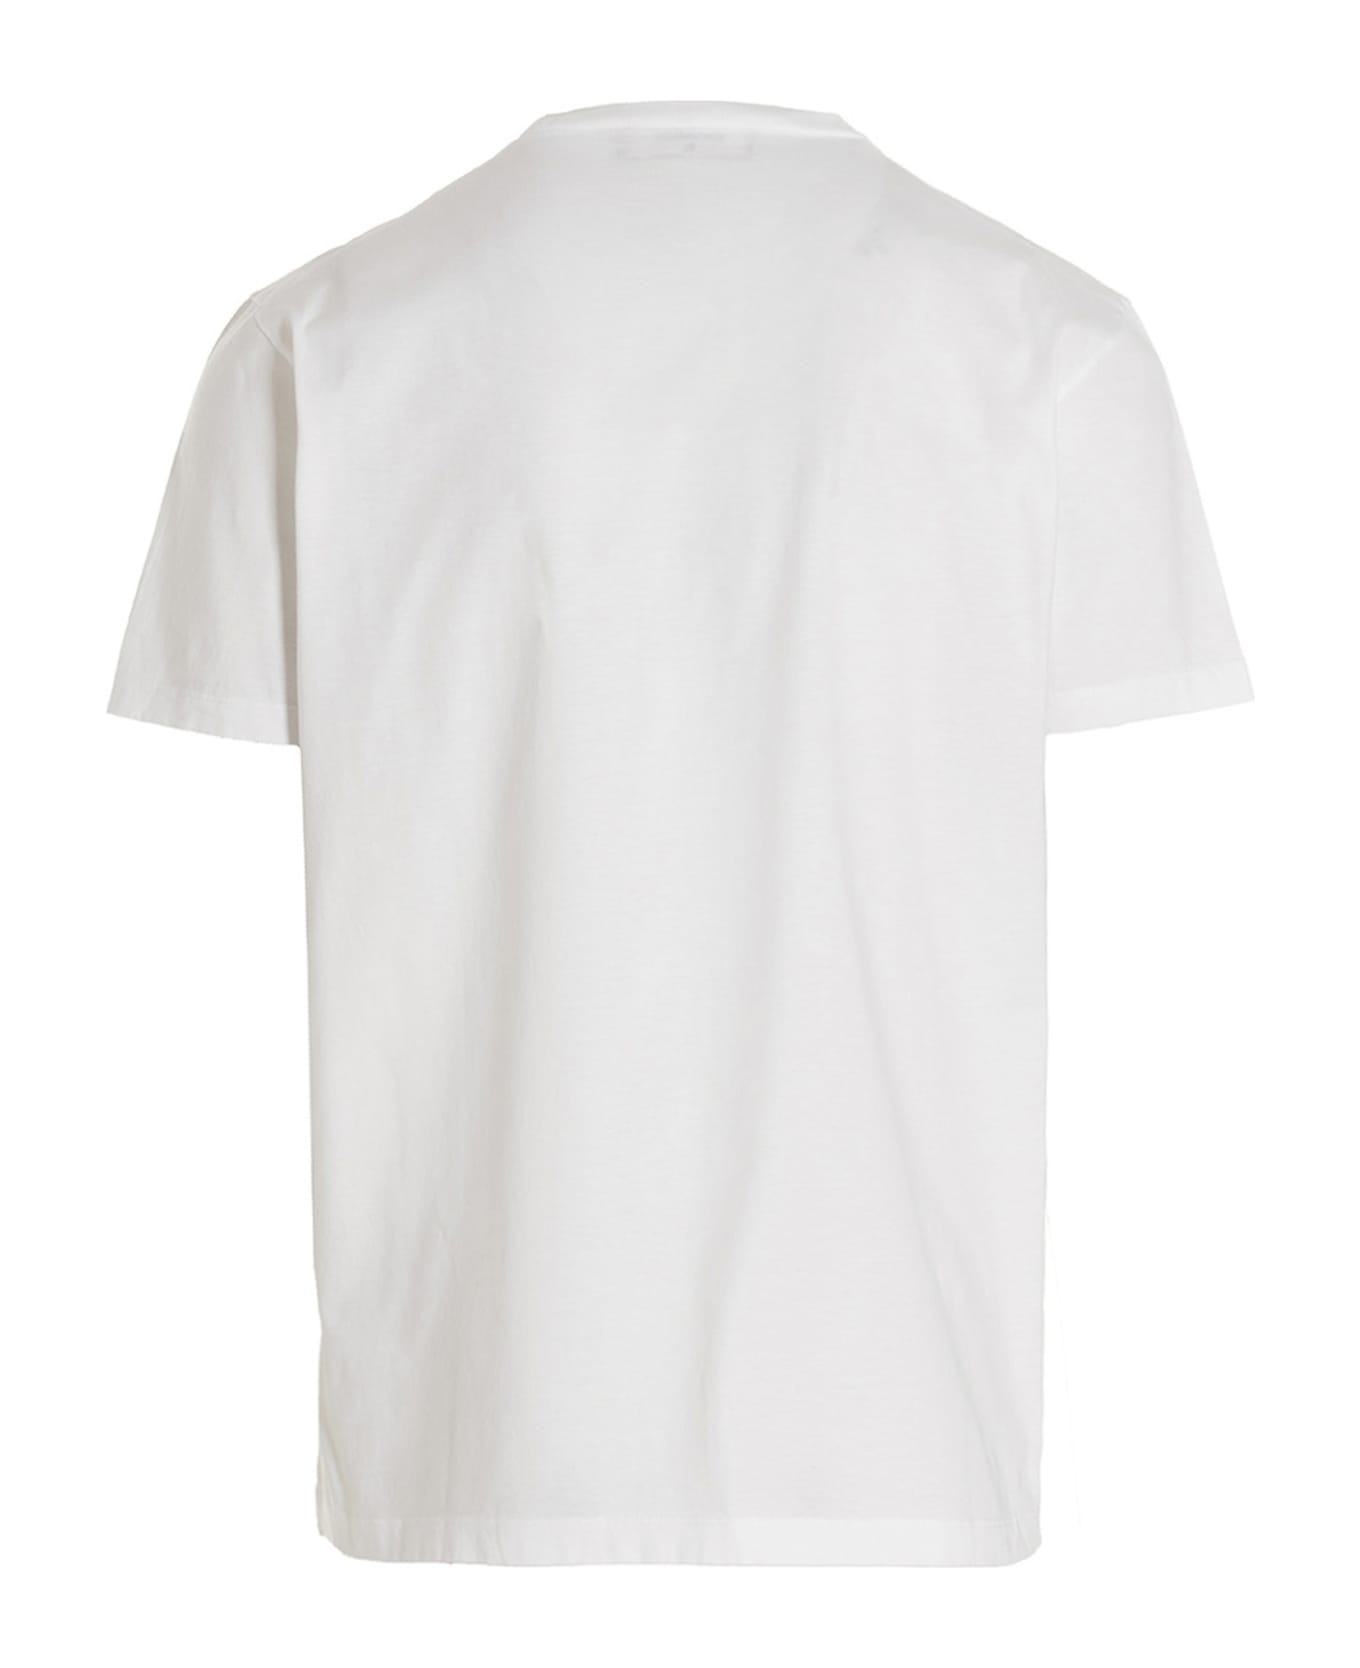 Dsquared2 'cool' T-shirt - White